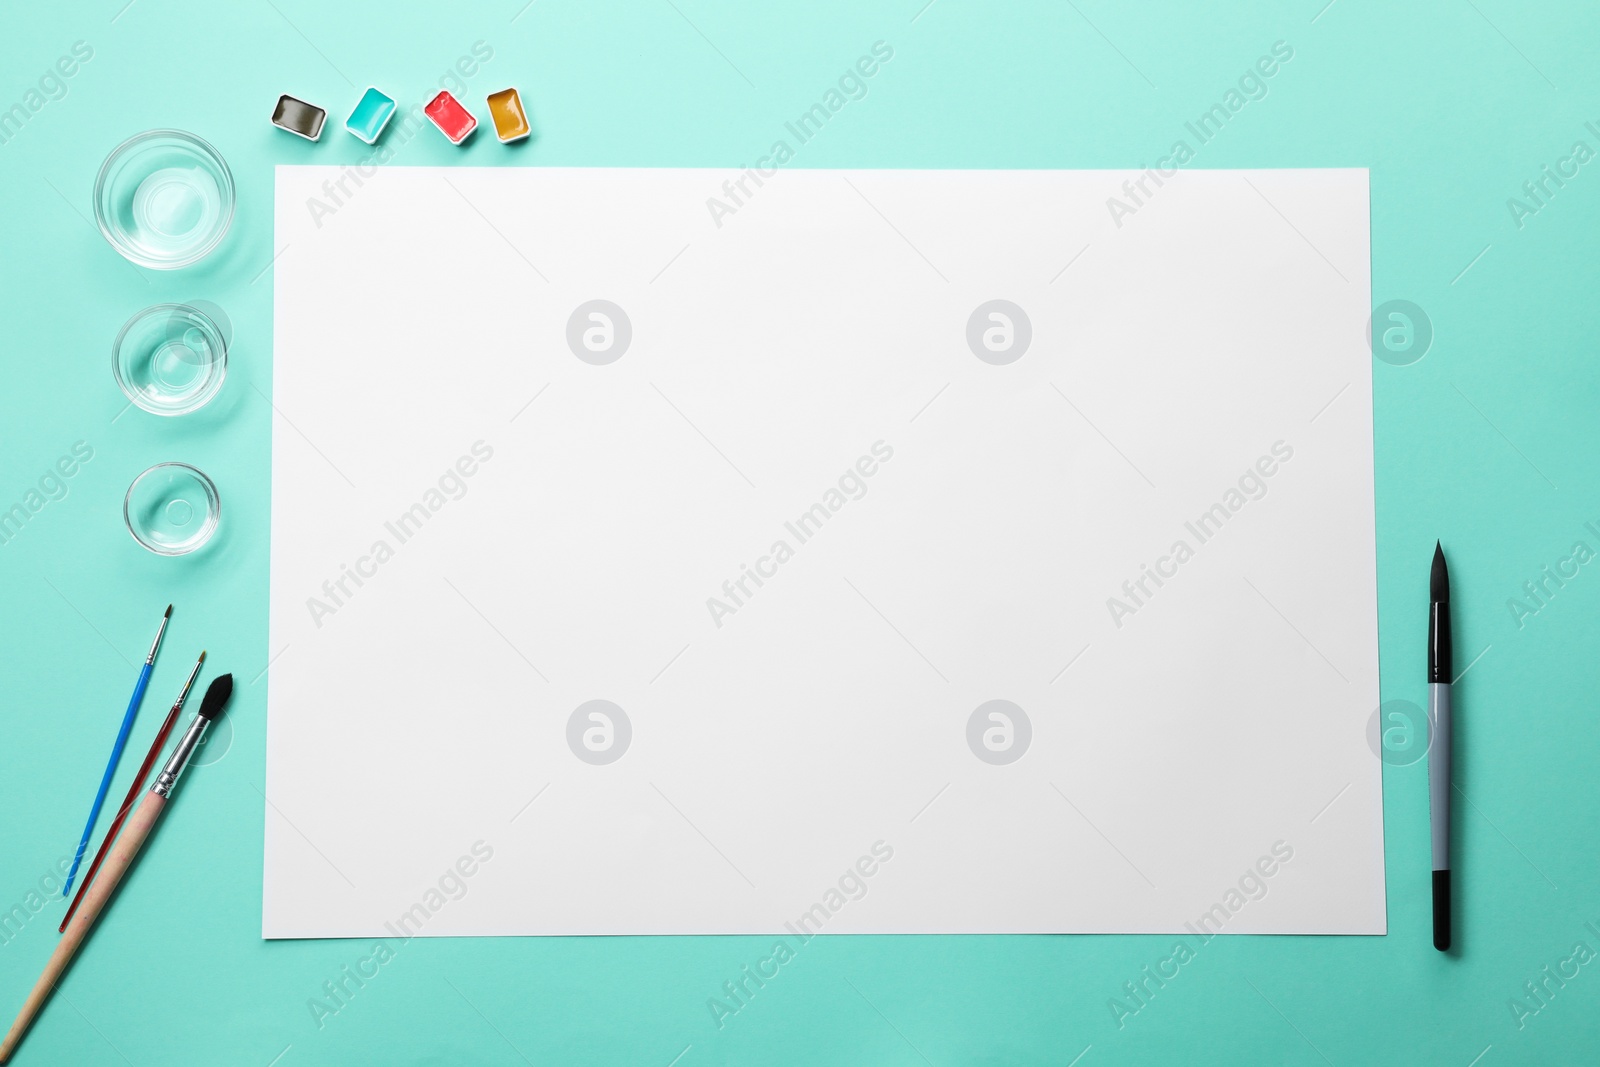 Photo of Blank sheet of paper, watercolor paints, empty bowls and brushes on turquoise background, flat lay